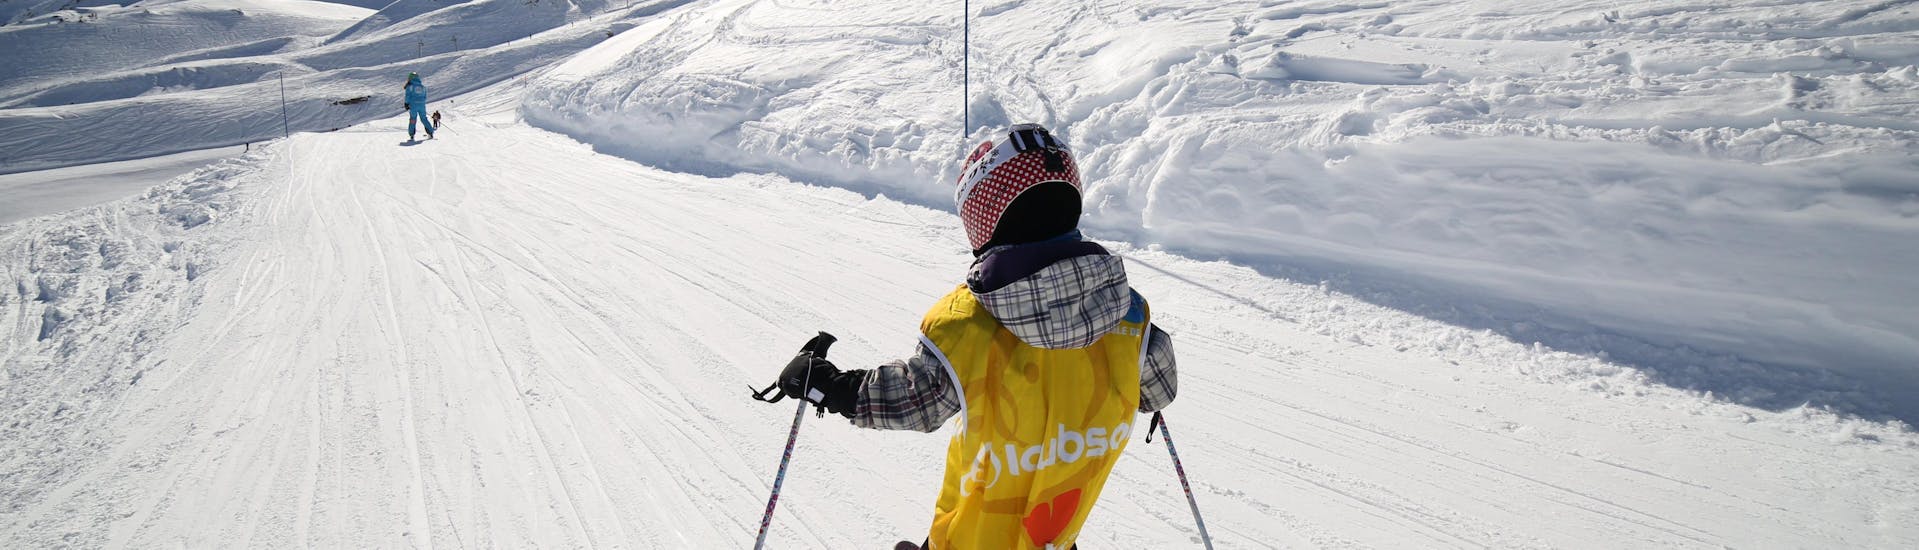 A youg skier is skiing down a snowy slope during his Kids Ski Lessons "Max 6" (6-12 years) - Low Season with the ski school ESI Font Romeu.